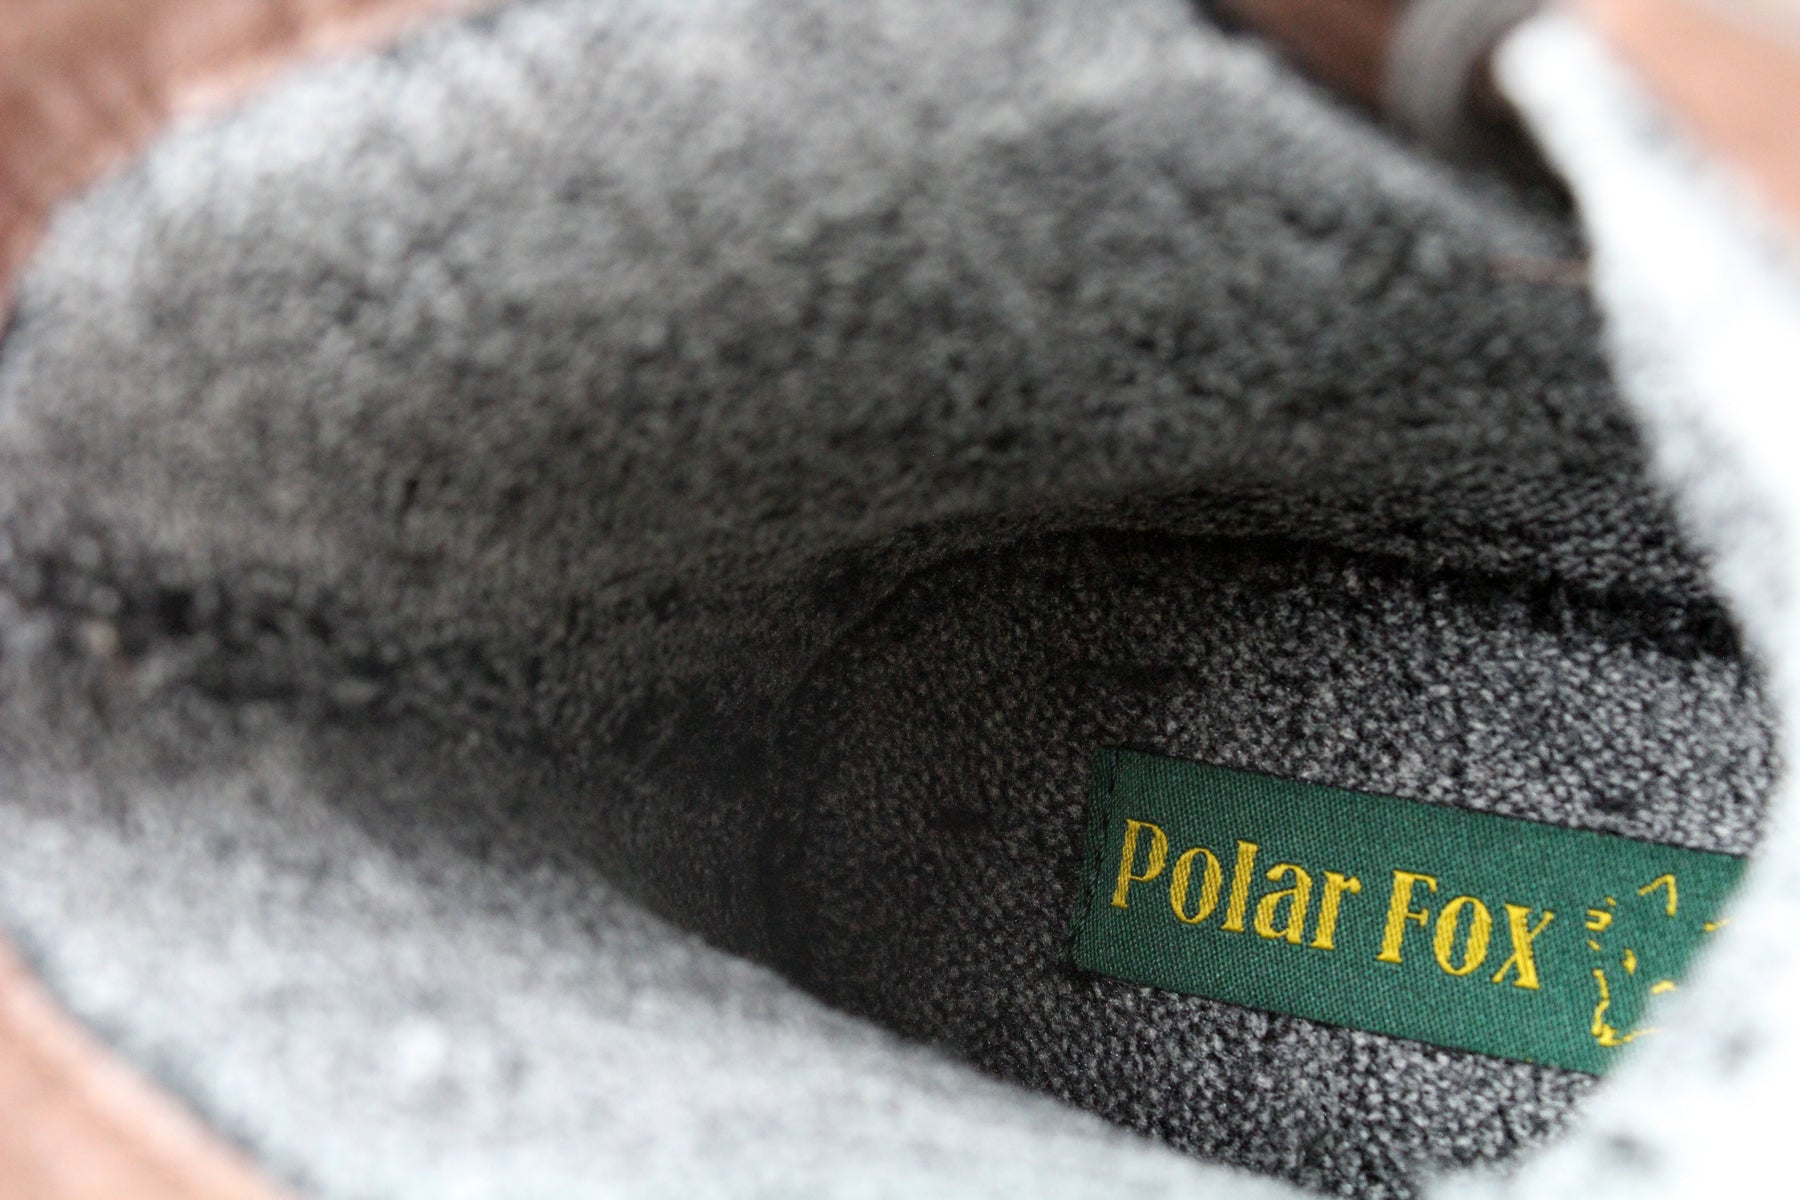 Rugged Inner Fur Boots | Fabian by Polar Fox | Conal Footwear | Close Up Lining Angle View